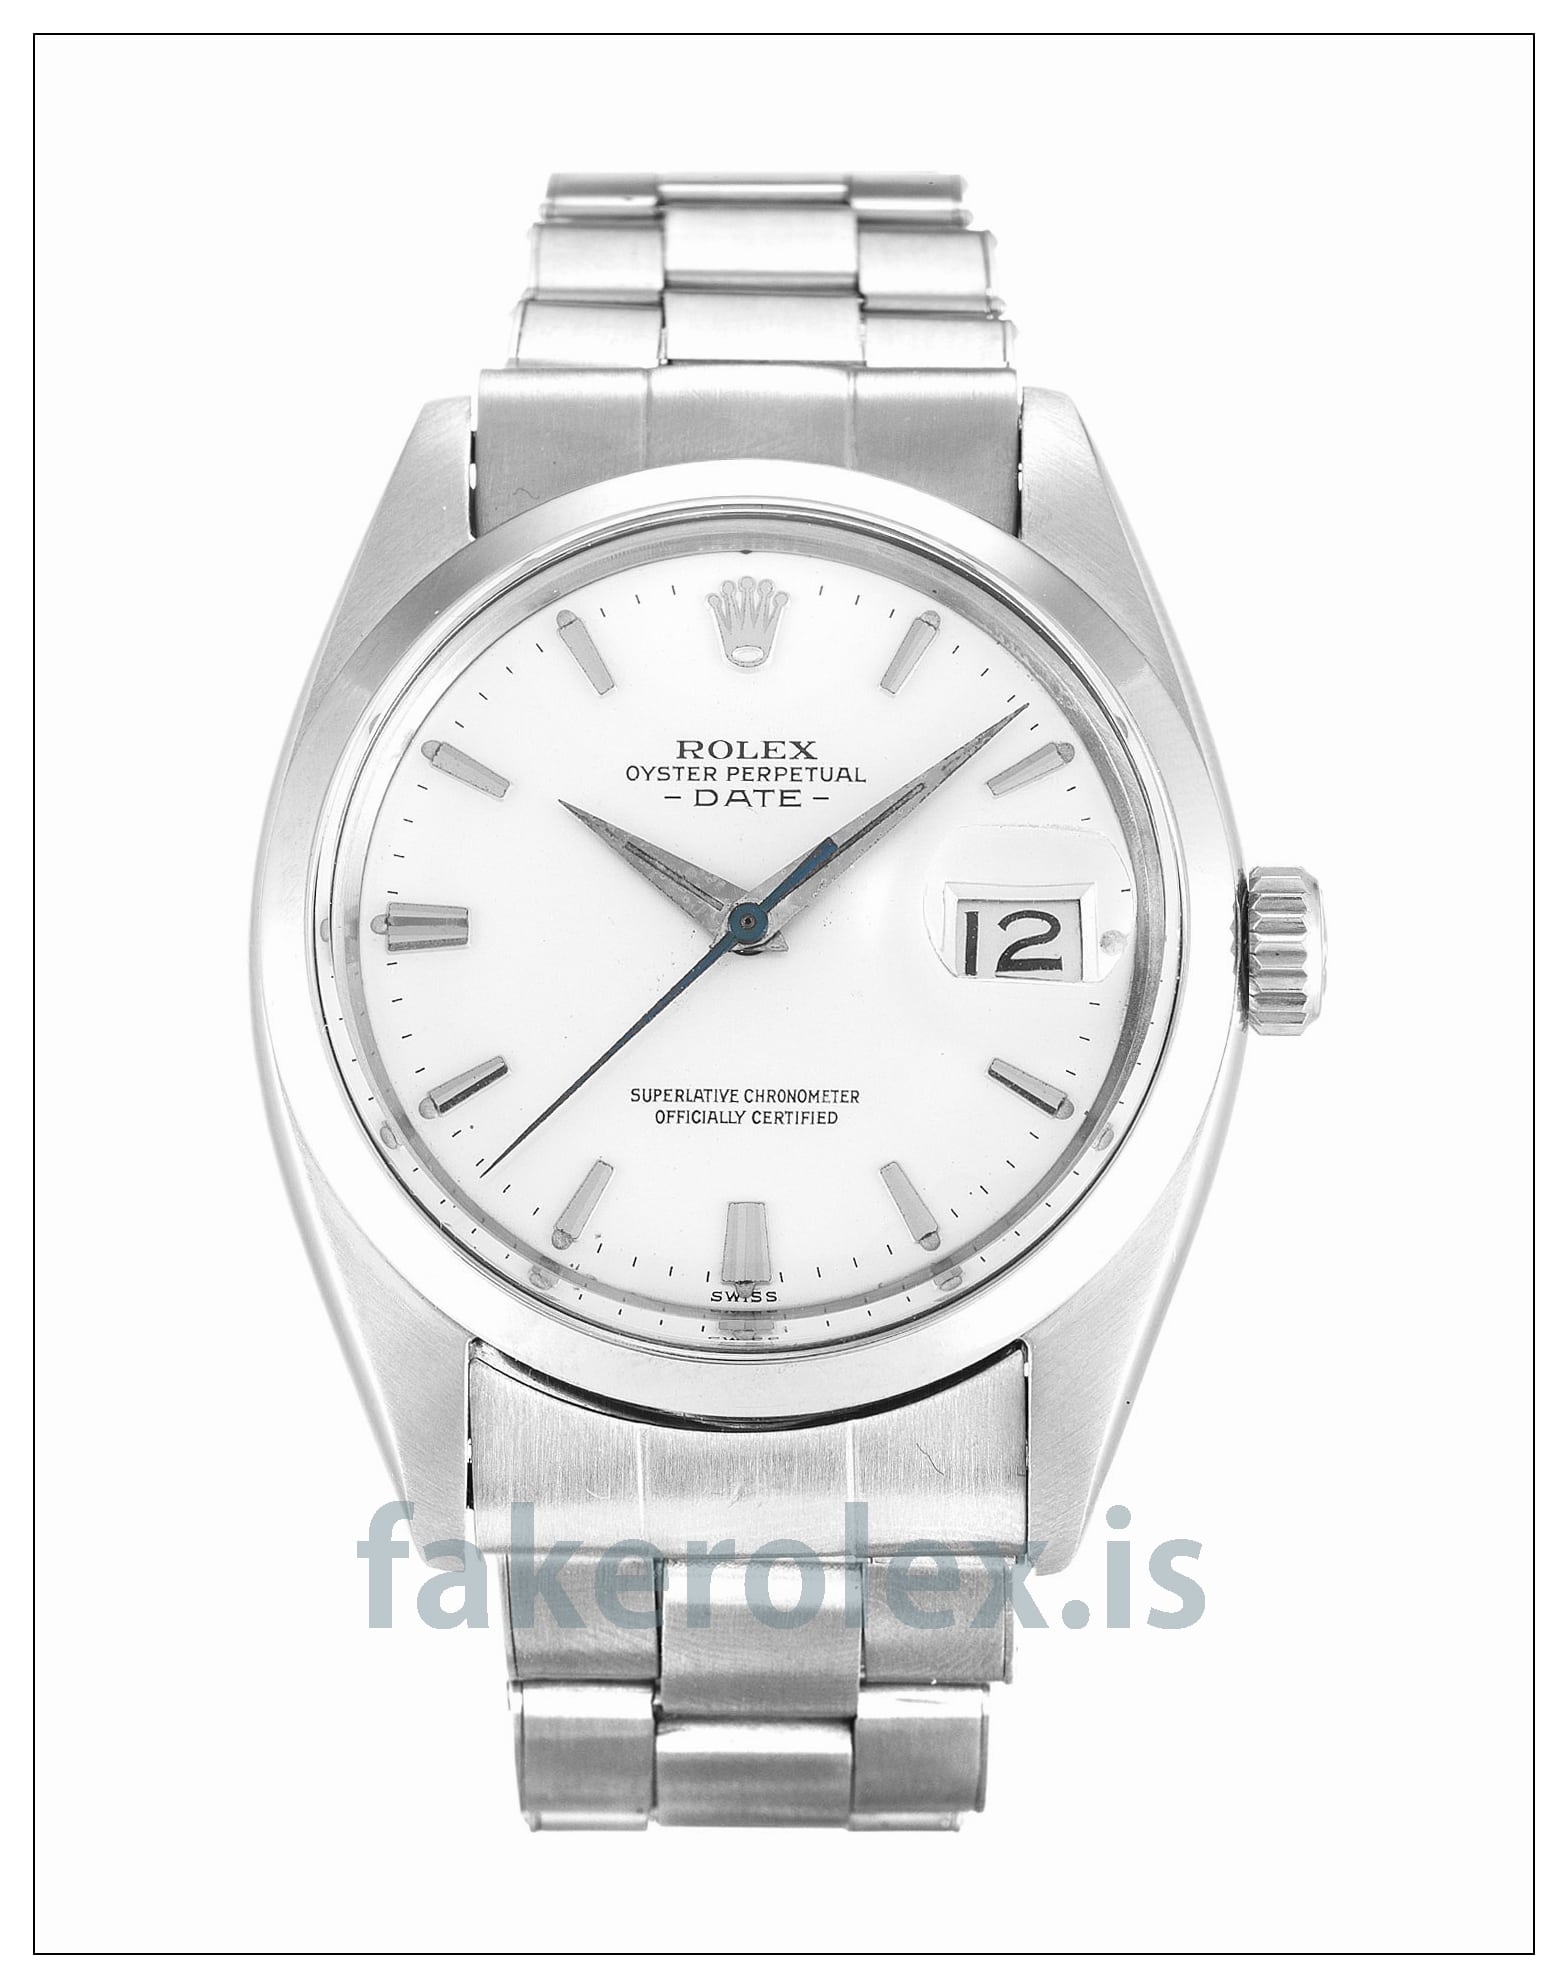 Rolex Oyster Perpetual Date 1500 - Fake 